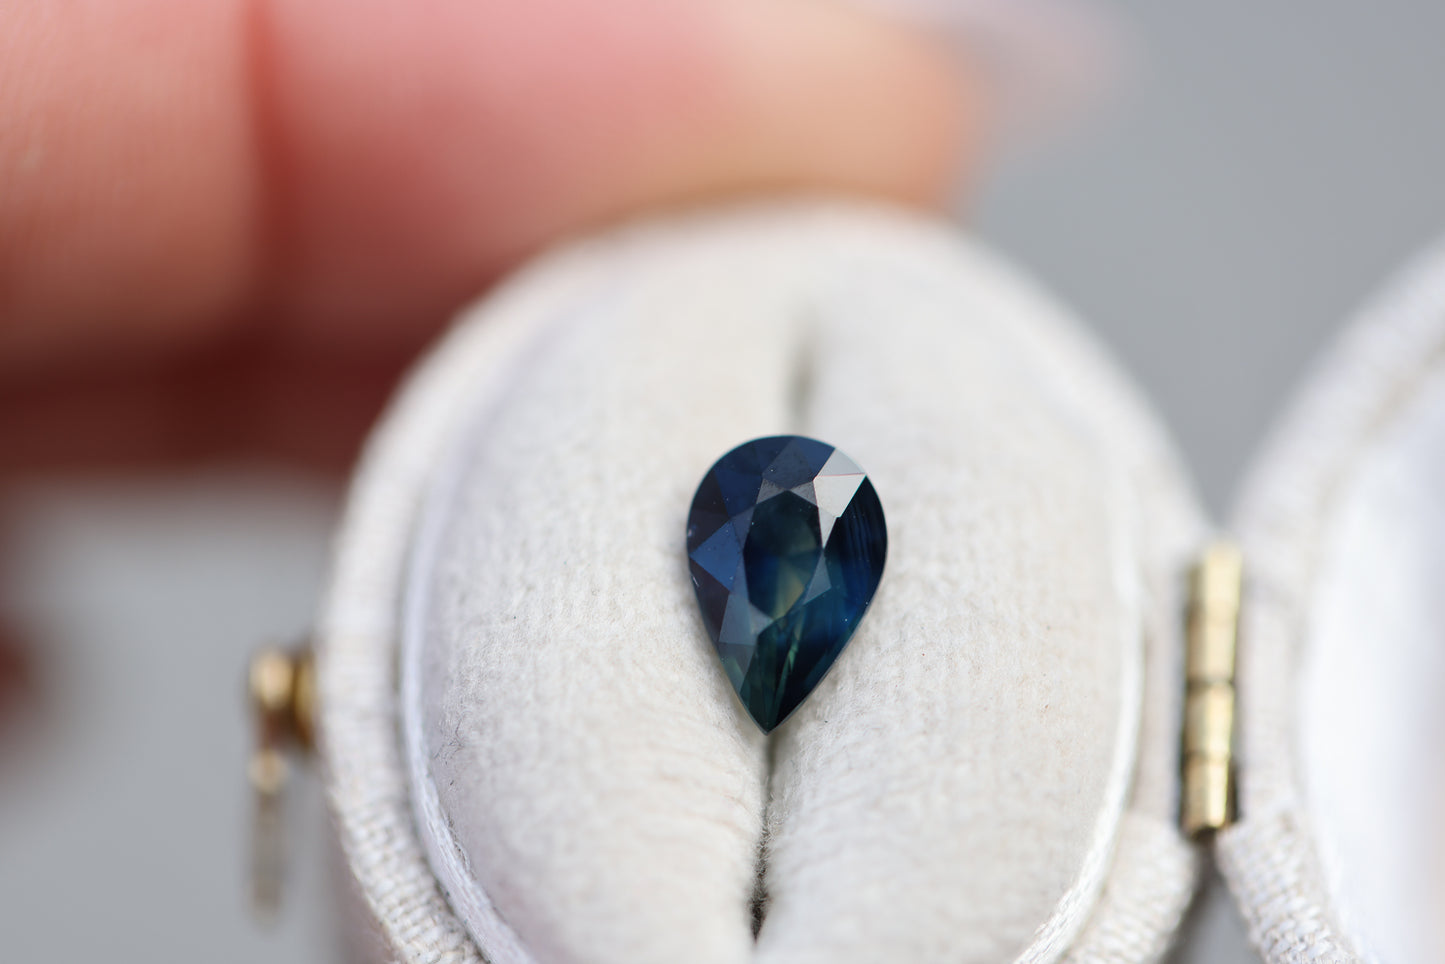 Load image into Gallery viewer, 1.81ct pear dark blue sapphire
